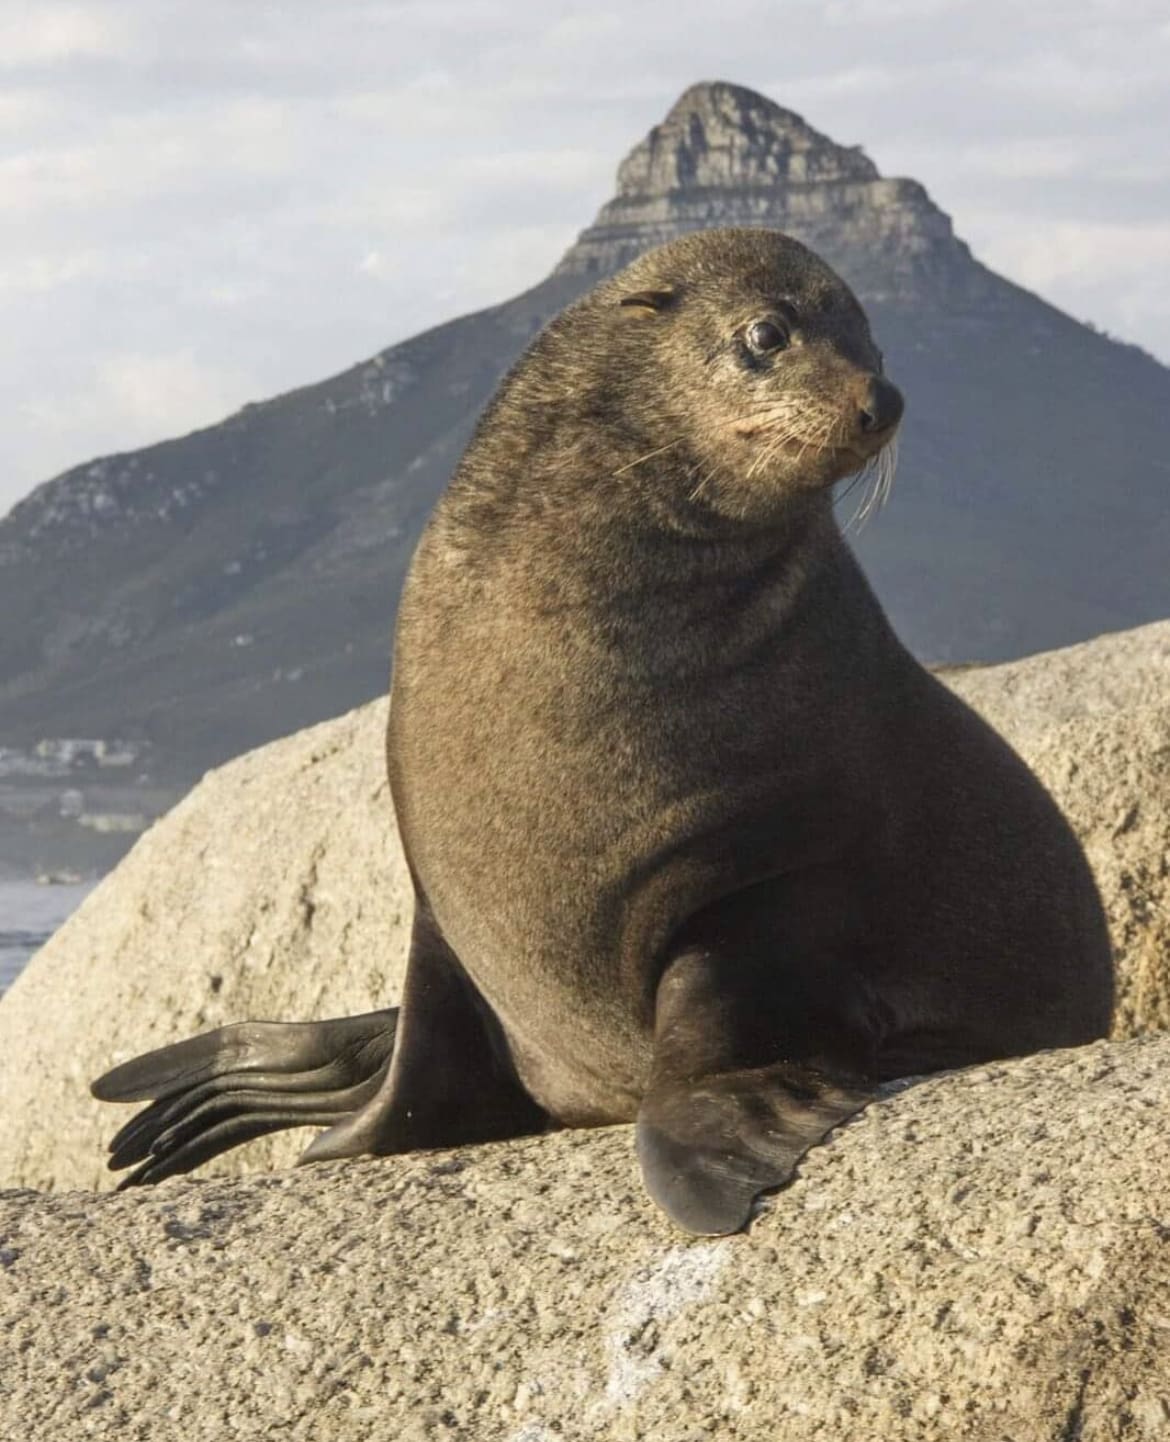 Cape Fur Seal in Cape Town, South Africa